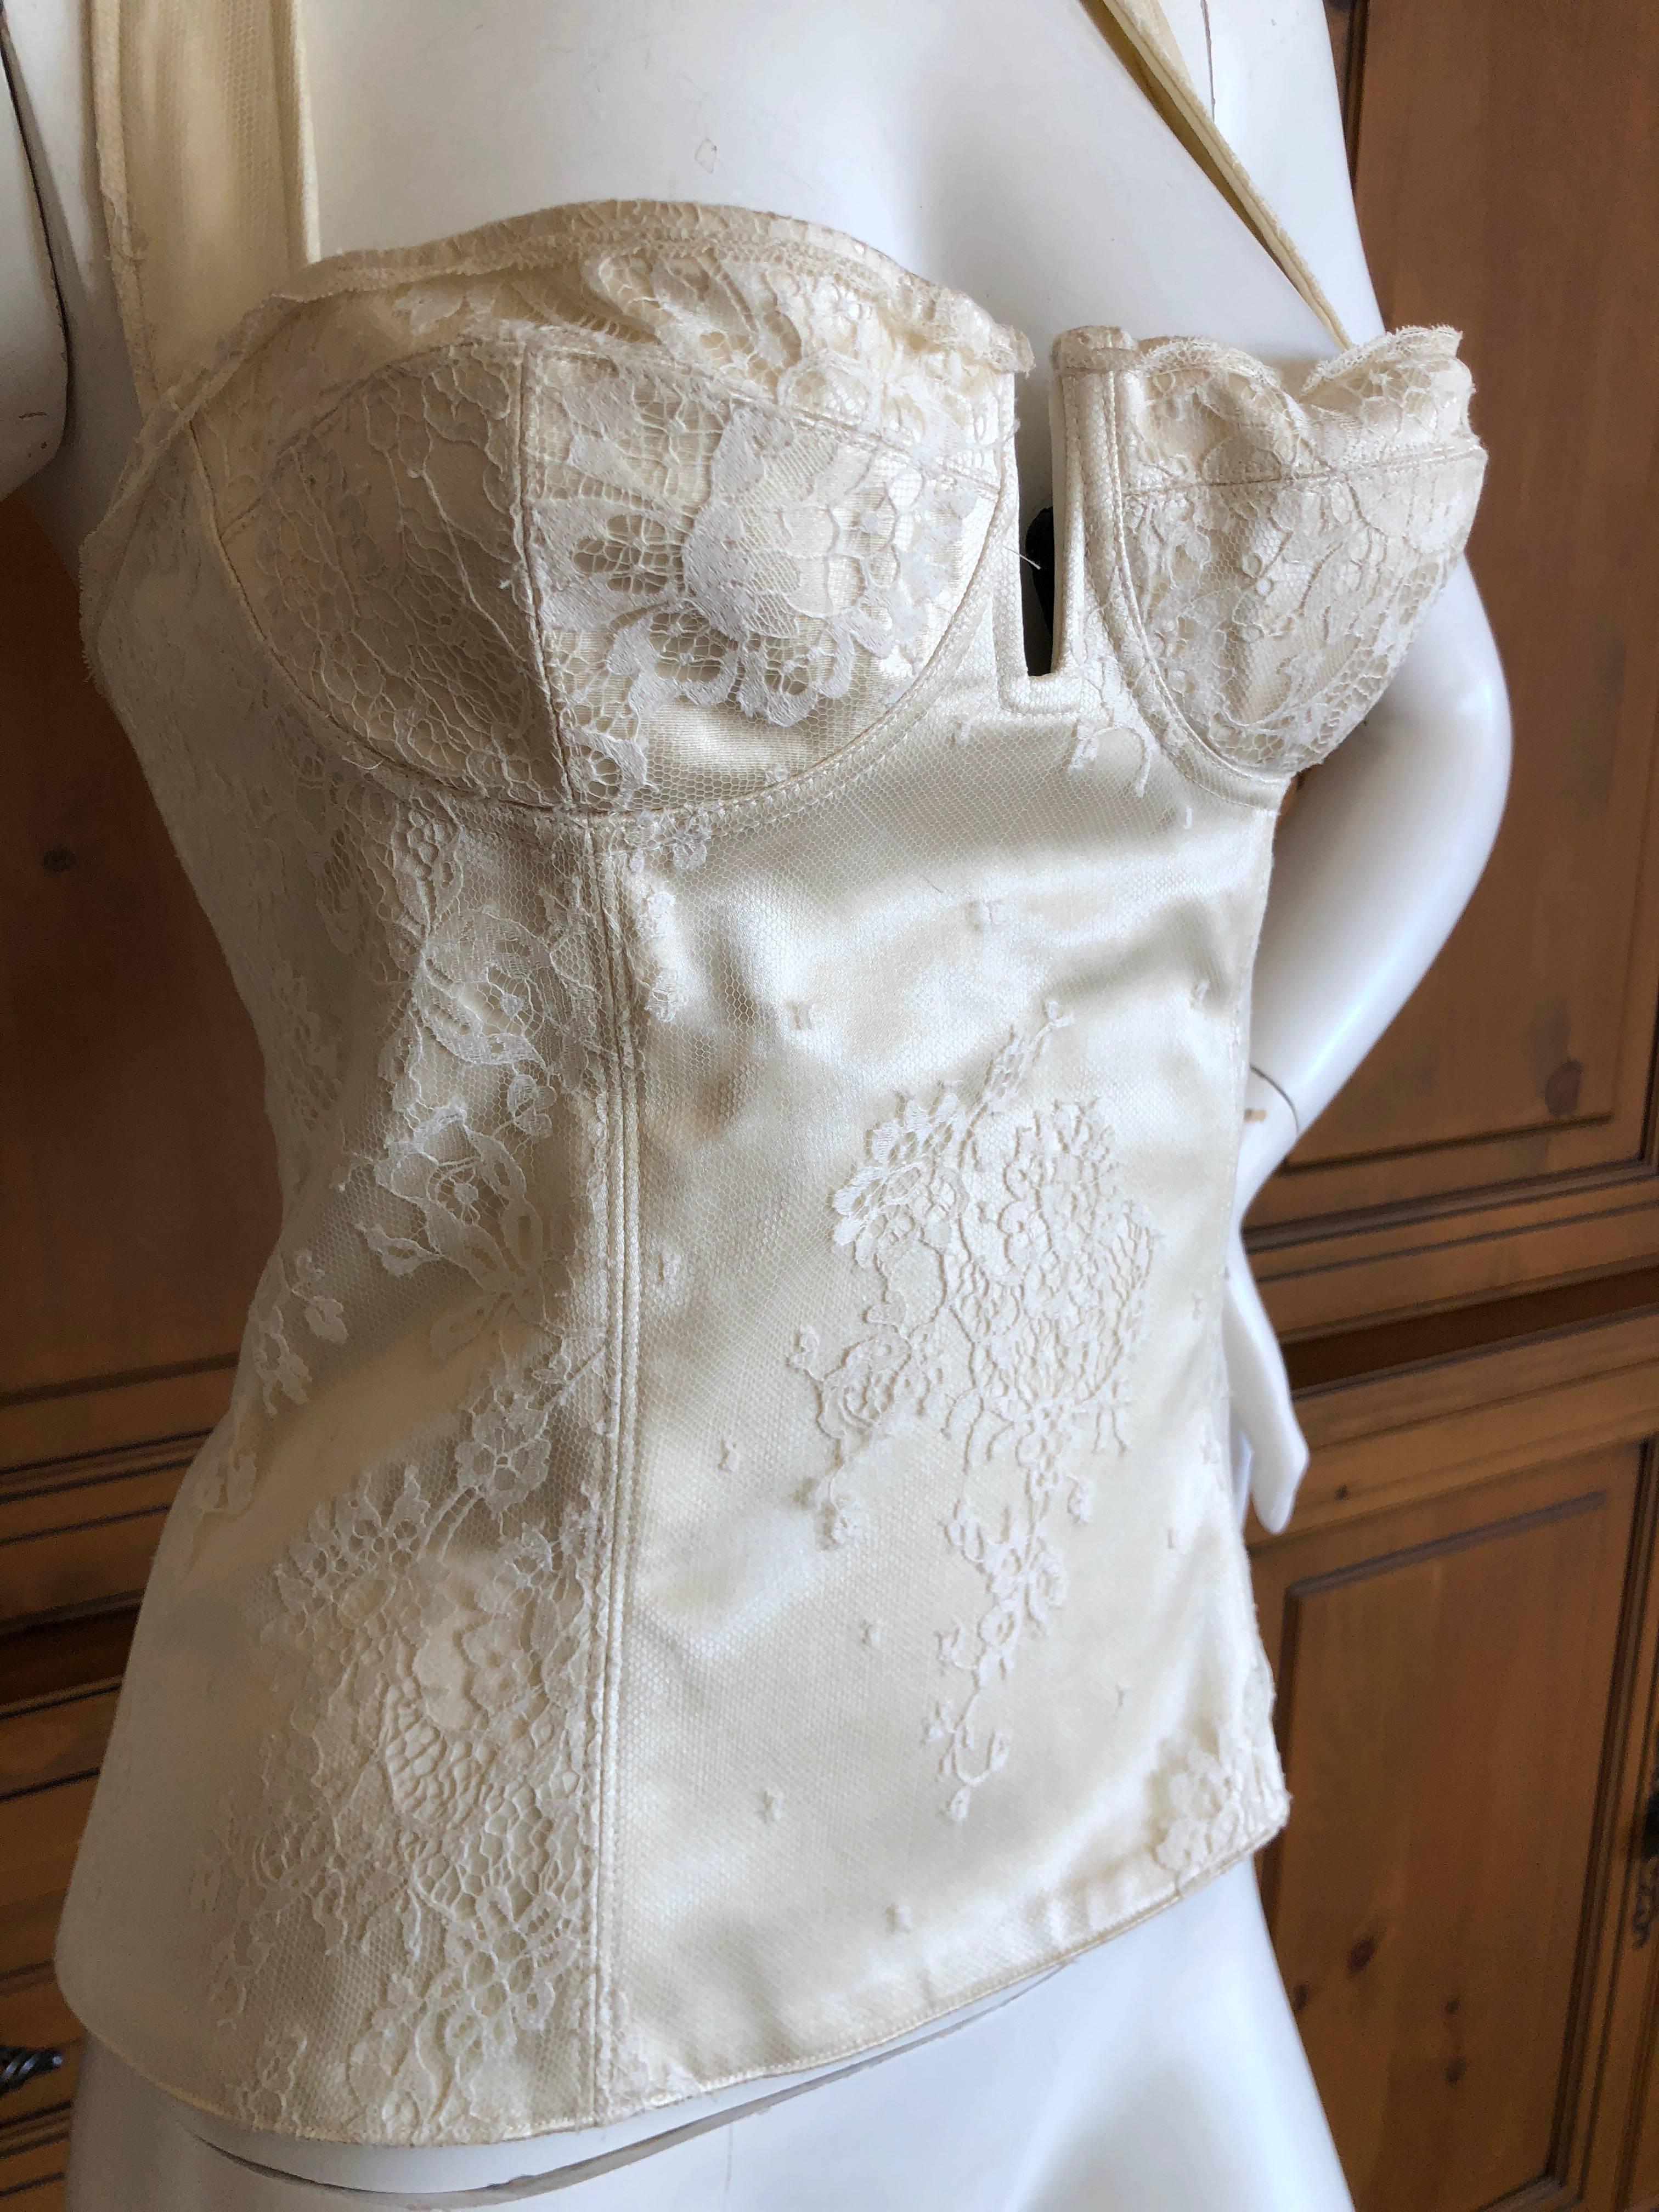 Christian Dior by John Galliano Vintage Lace Overlay Corset Bustier
Spring Summer 2004
Size 38
Bust 34